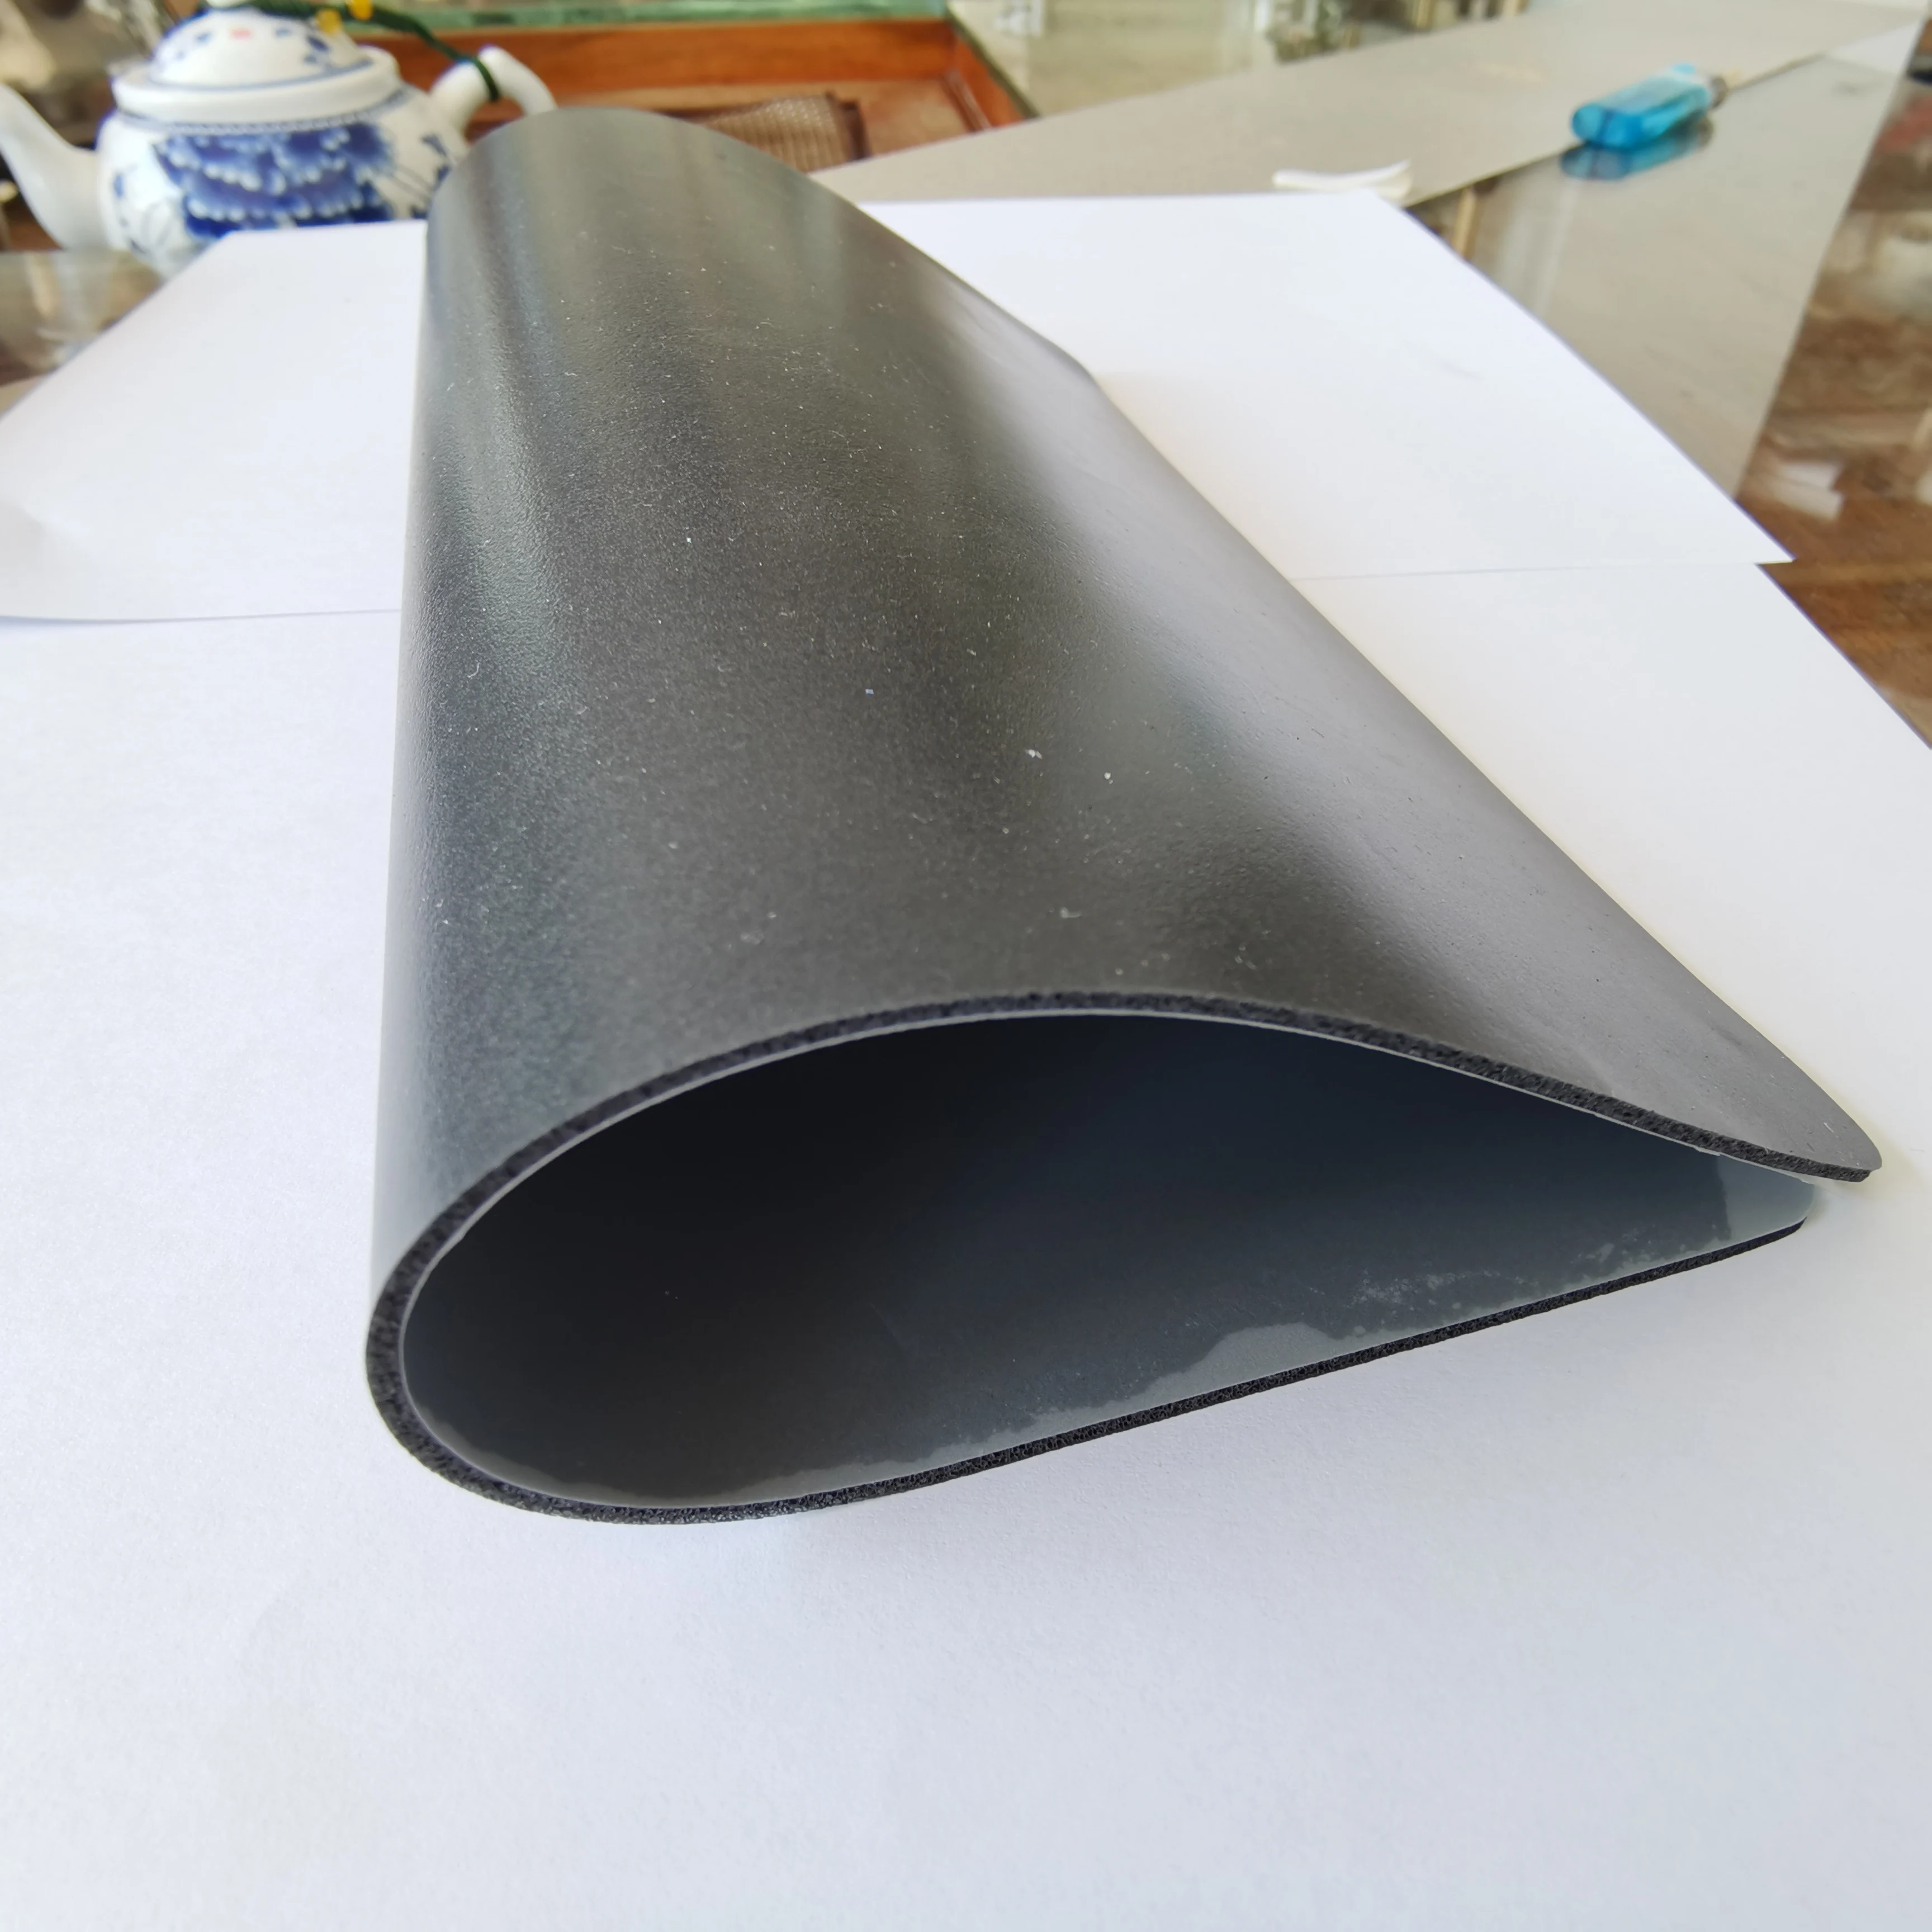 Bisco Silicon Ht800 Silicone Rubber Foam Sheet 0.8mm 1.6mm 2mm 4mm 6mm ...